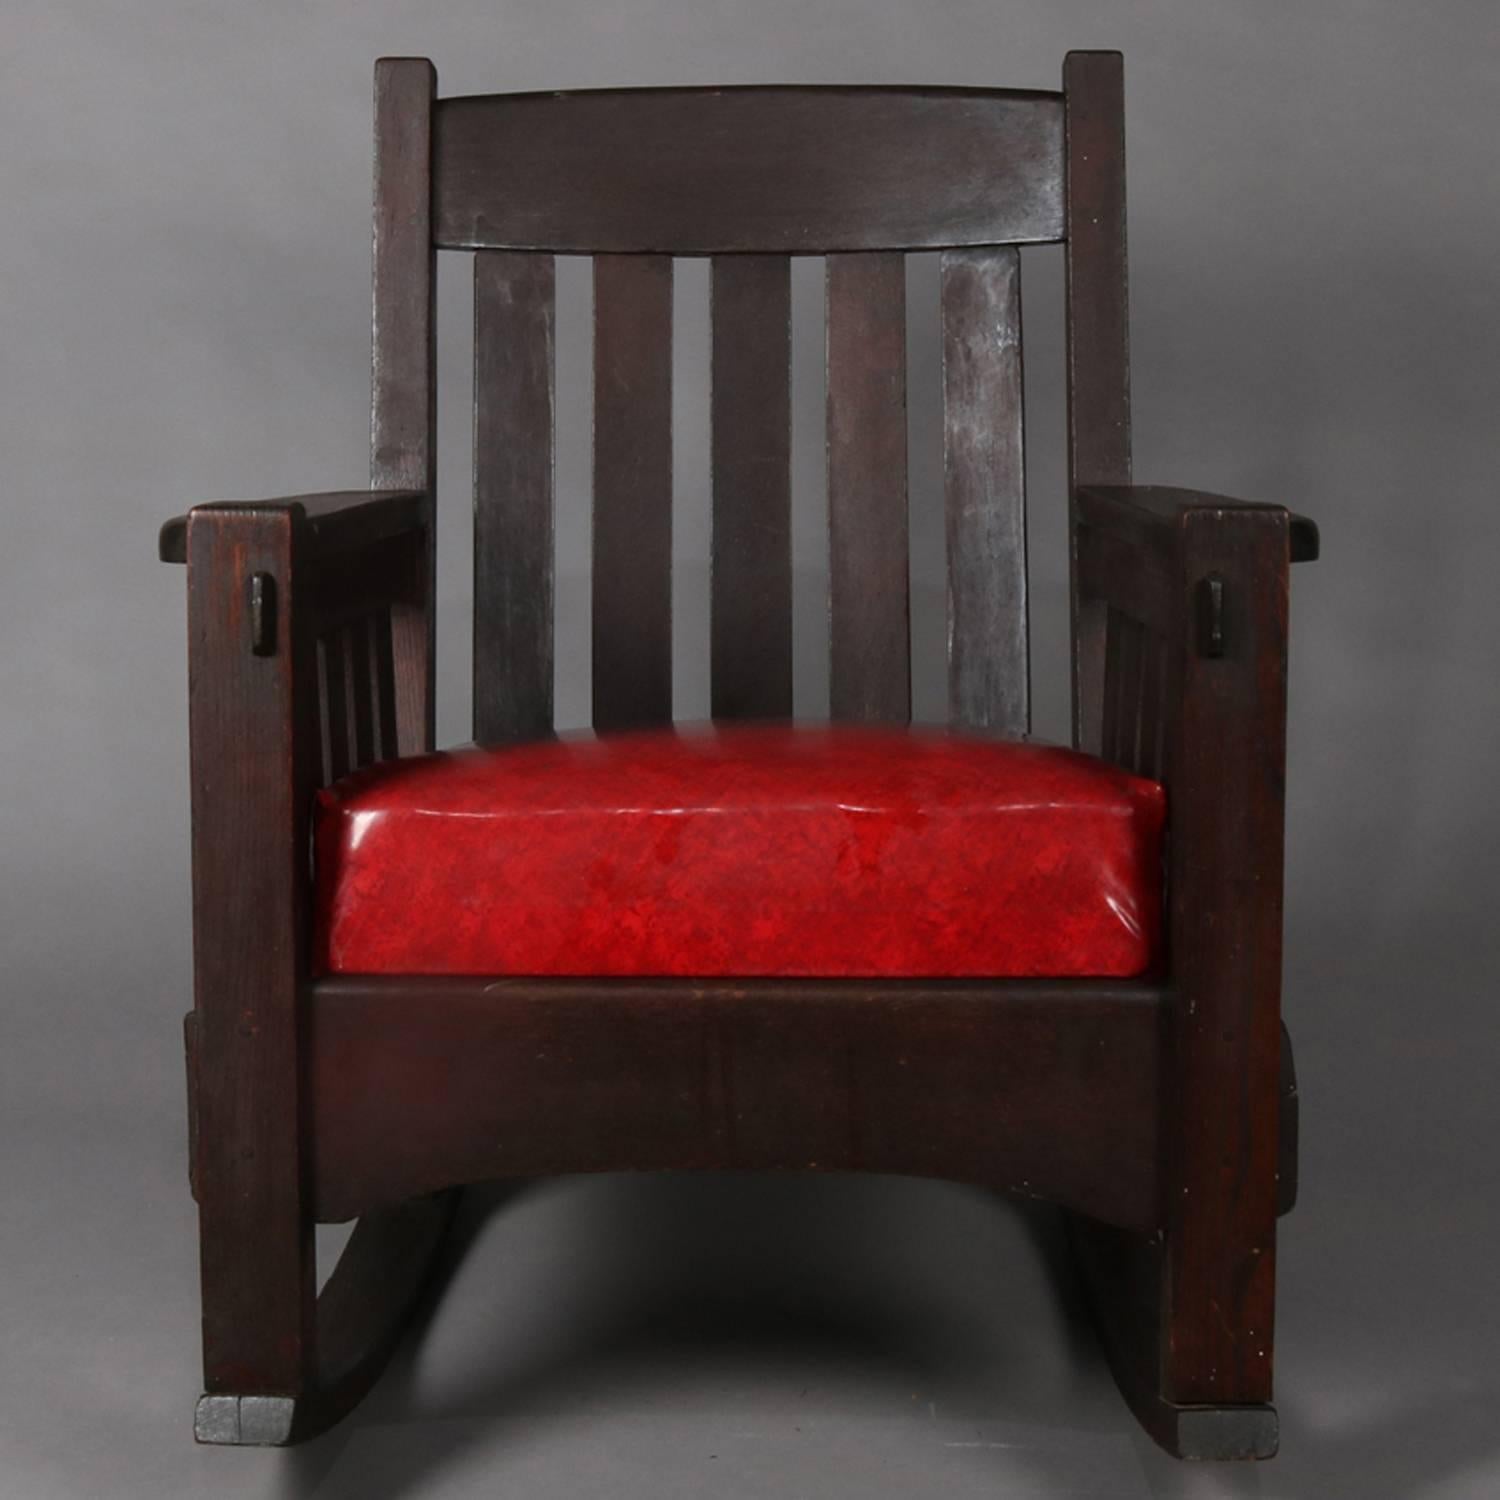 Antique Arts & Crafts mission oak Gustav Stickley school rocker by Harden Furniture features traditional slat back and arms with thick cushioned seat, circa 1910

Measures: 35